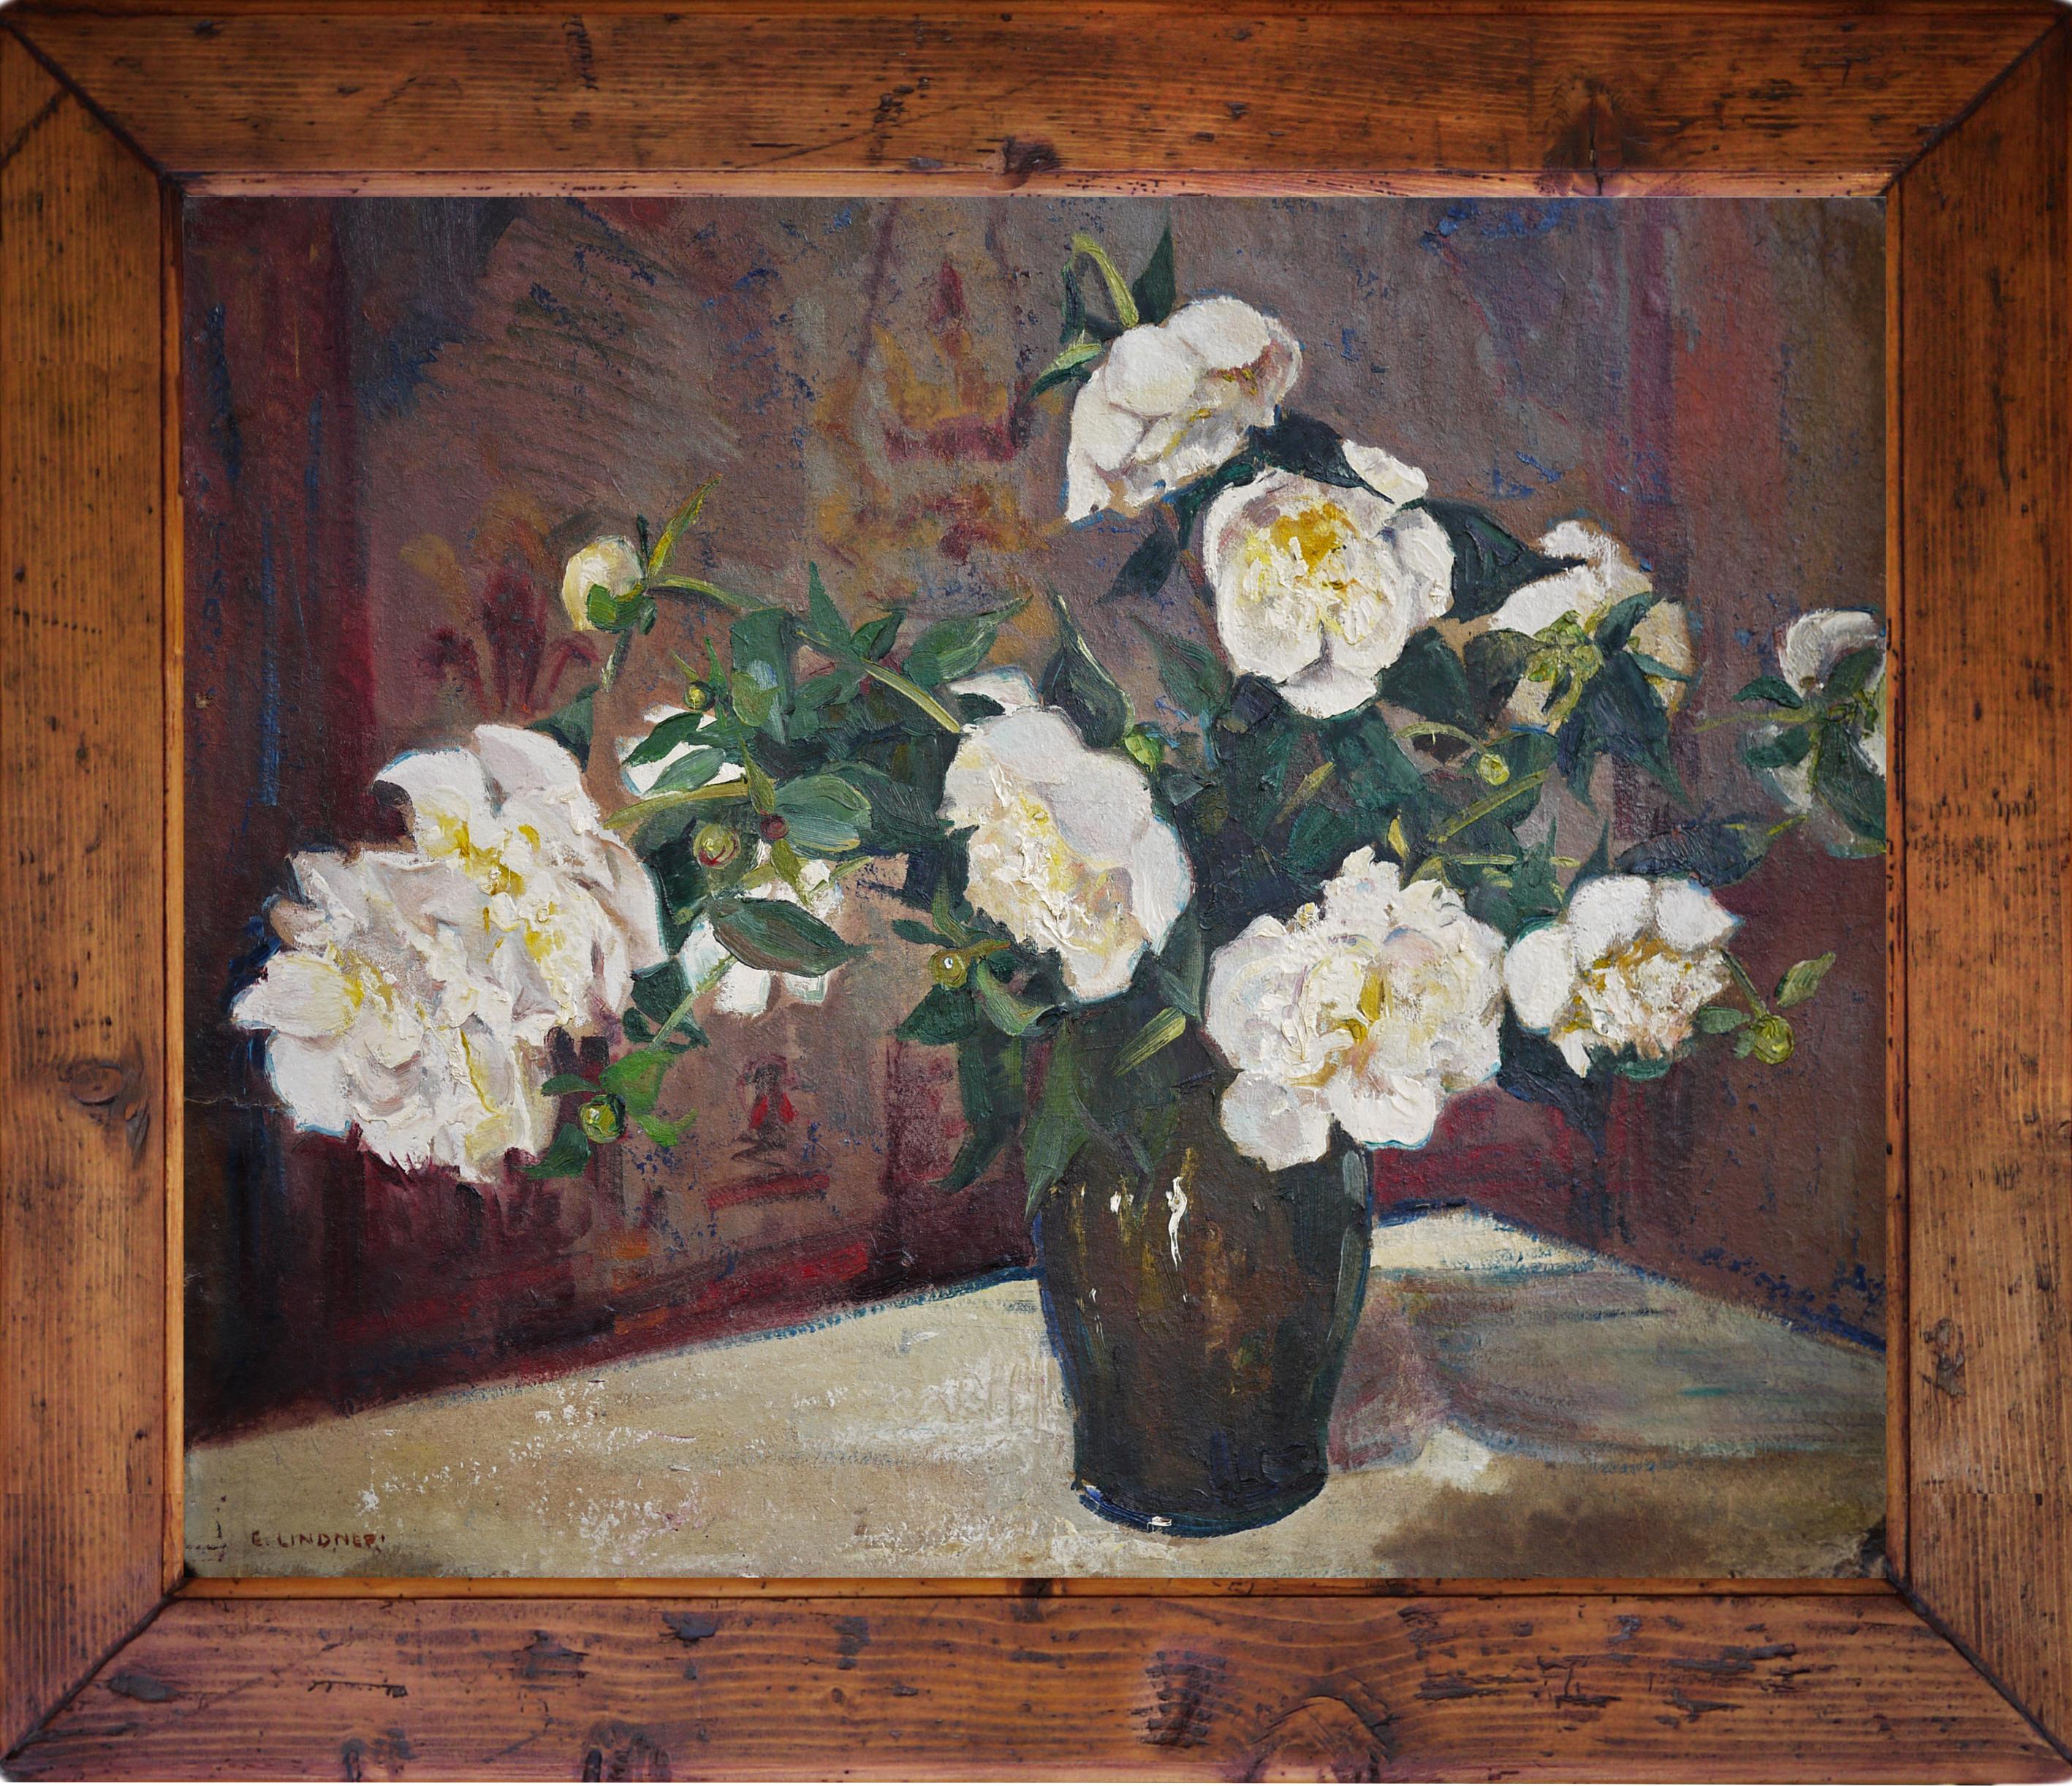 Field Roses – Elsa Sturm-Lindner

70cm x 90cm (dimensions referring to the canvas only), oil on panel – 1950s

Elsa Sturm-Lindner (Dresden 1916 – 1988 Ebenda)

Floral composition characterized by refined volumes of color.

Available with an